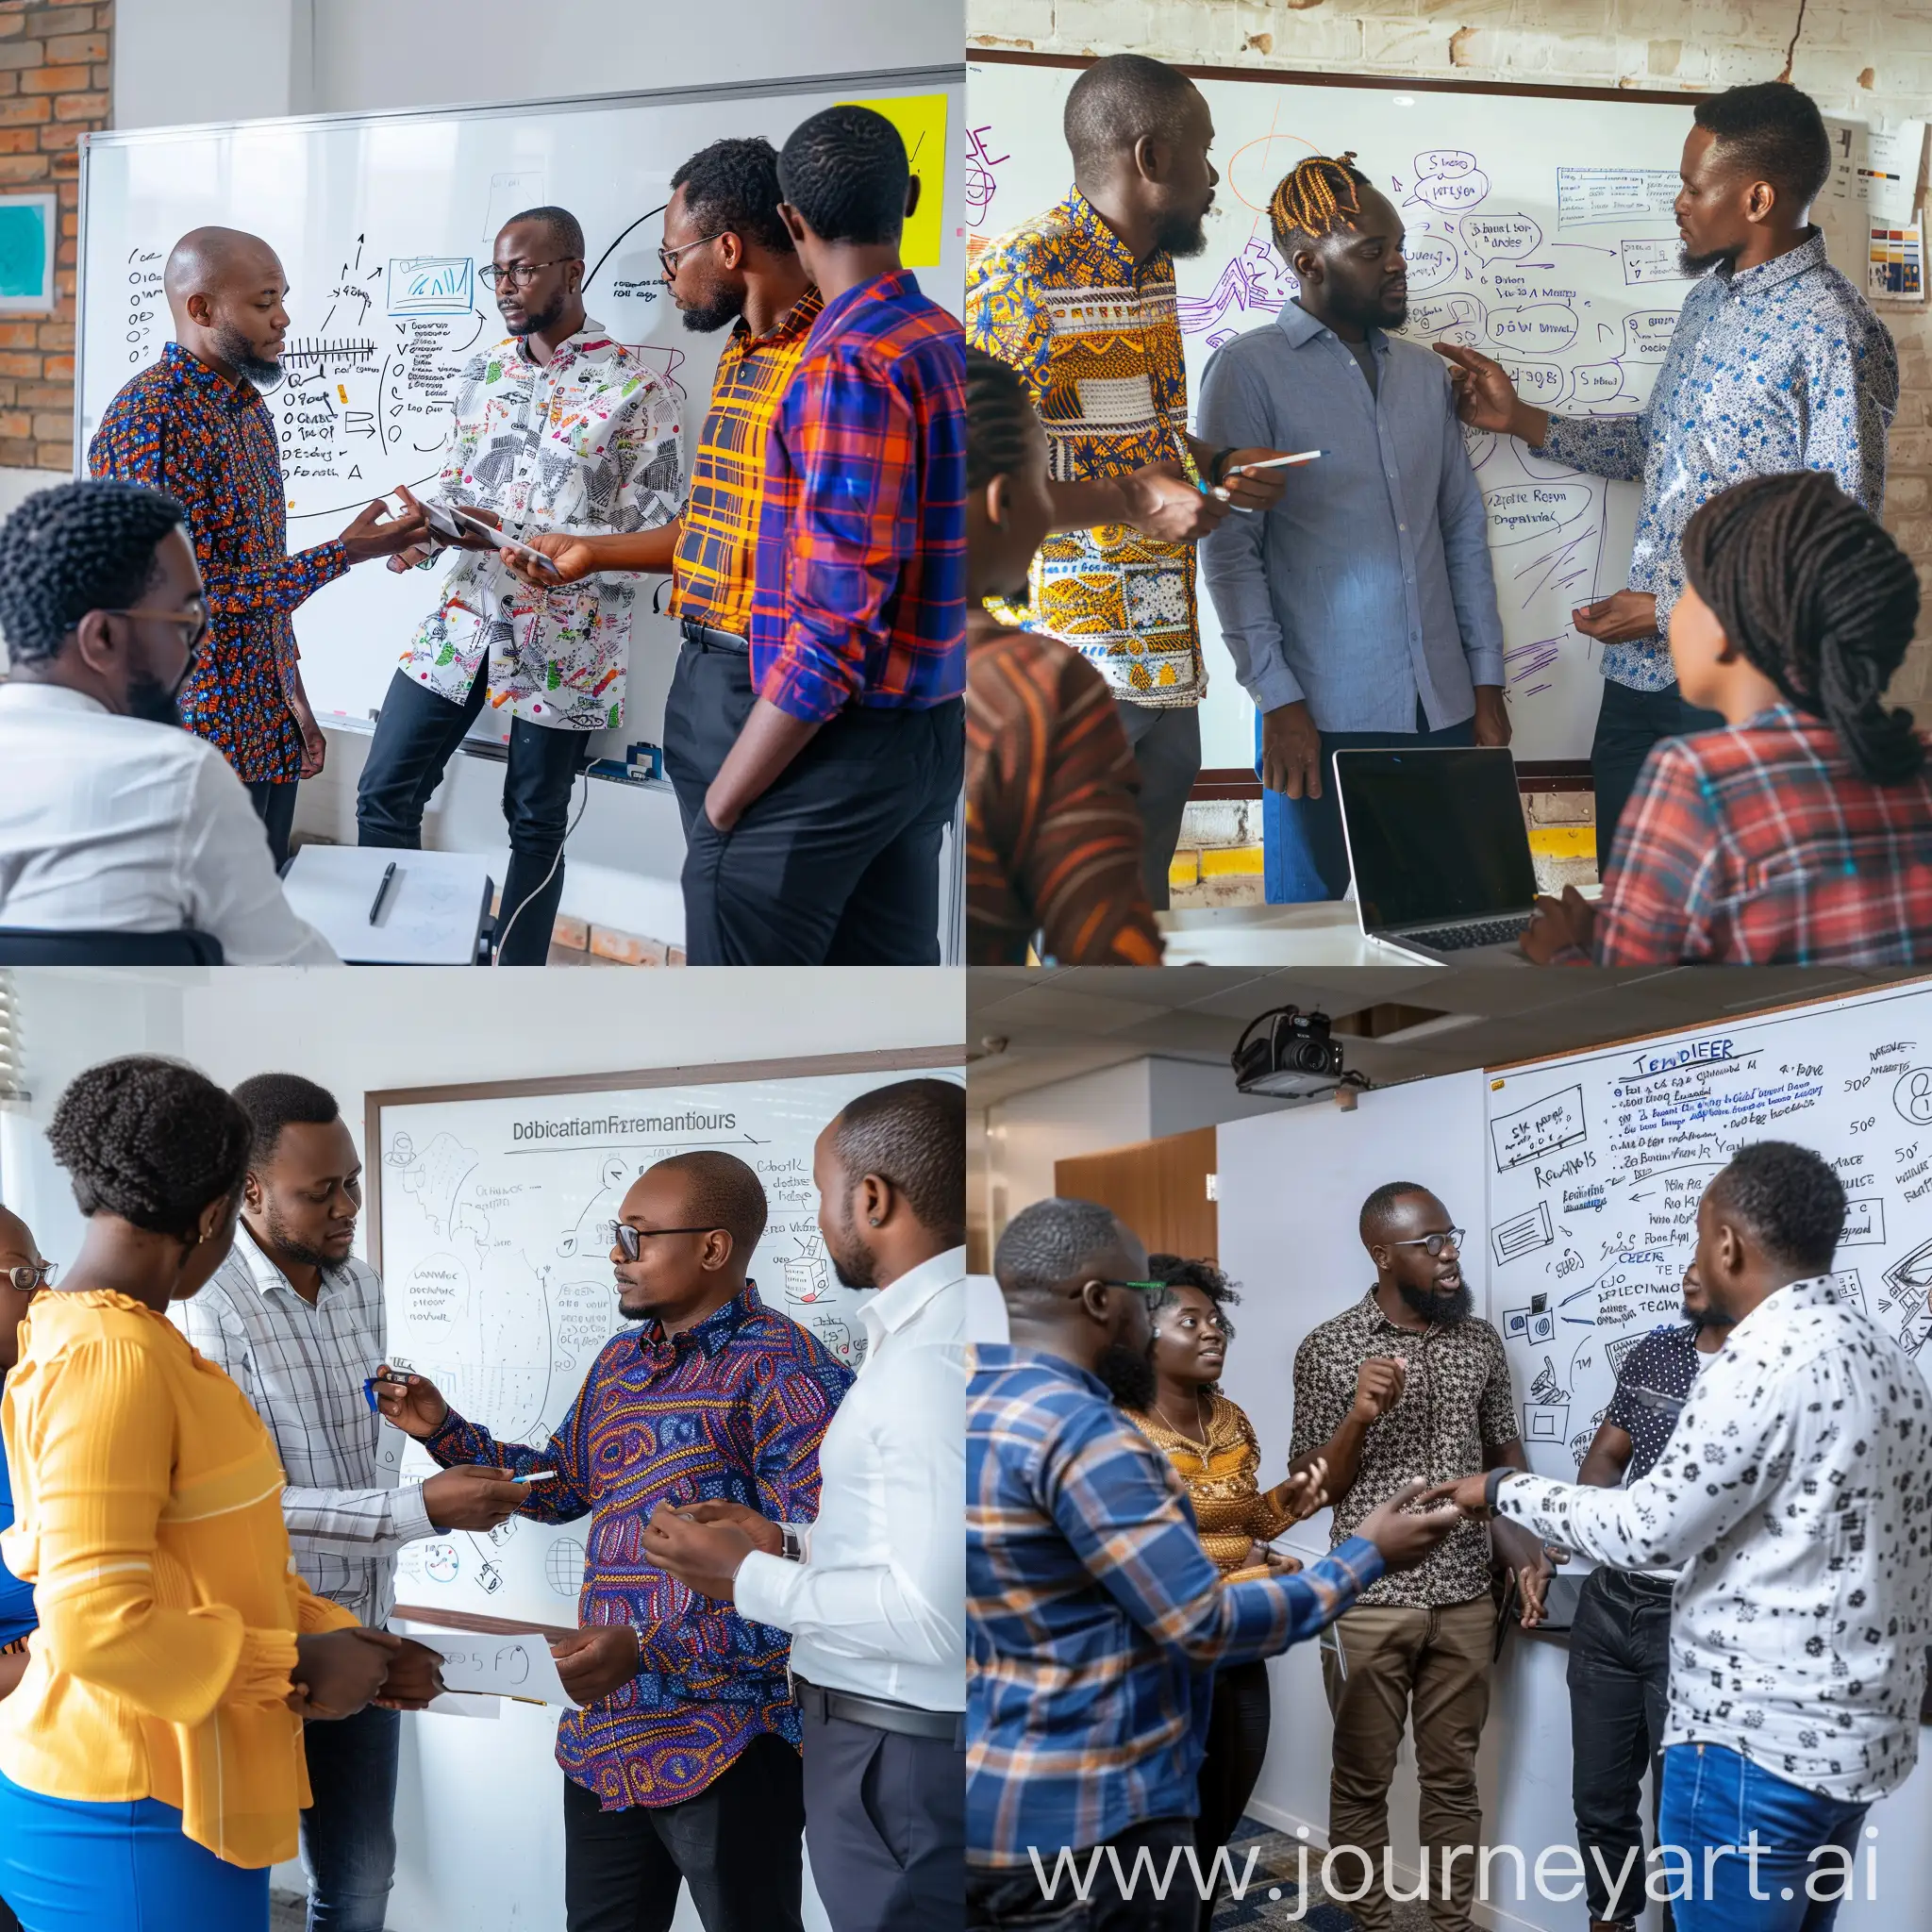 create a vibrant image of three to five 40 year-old African men and women meeting around a whiteboard discussing digital transformation